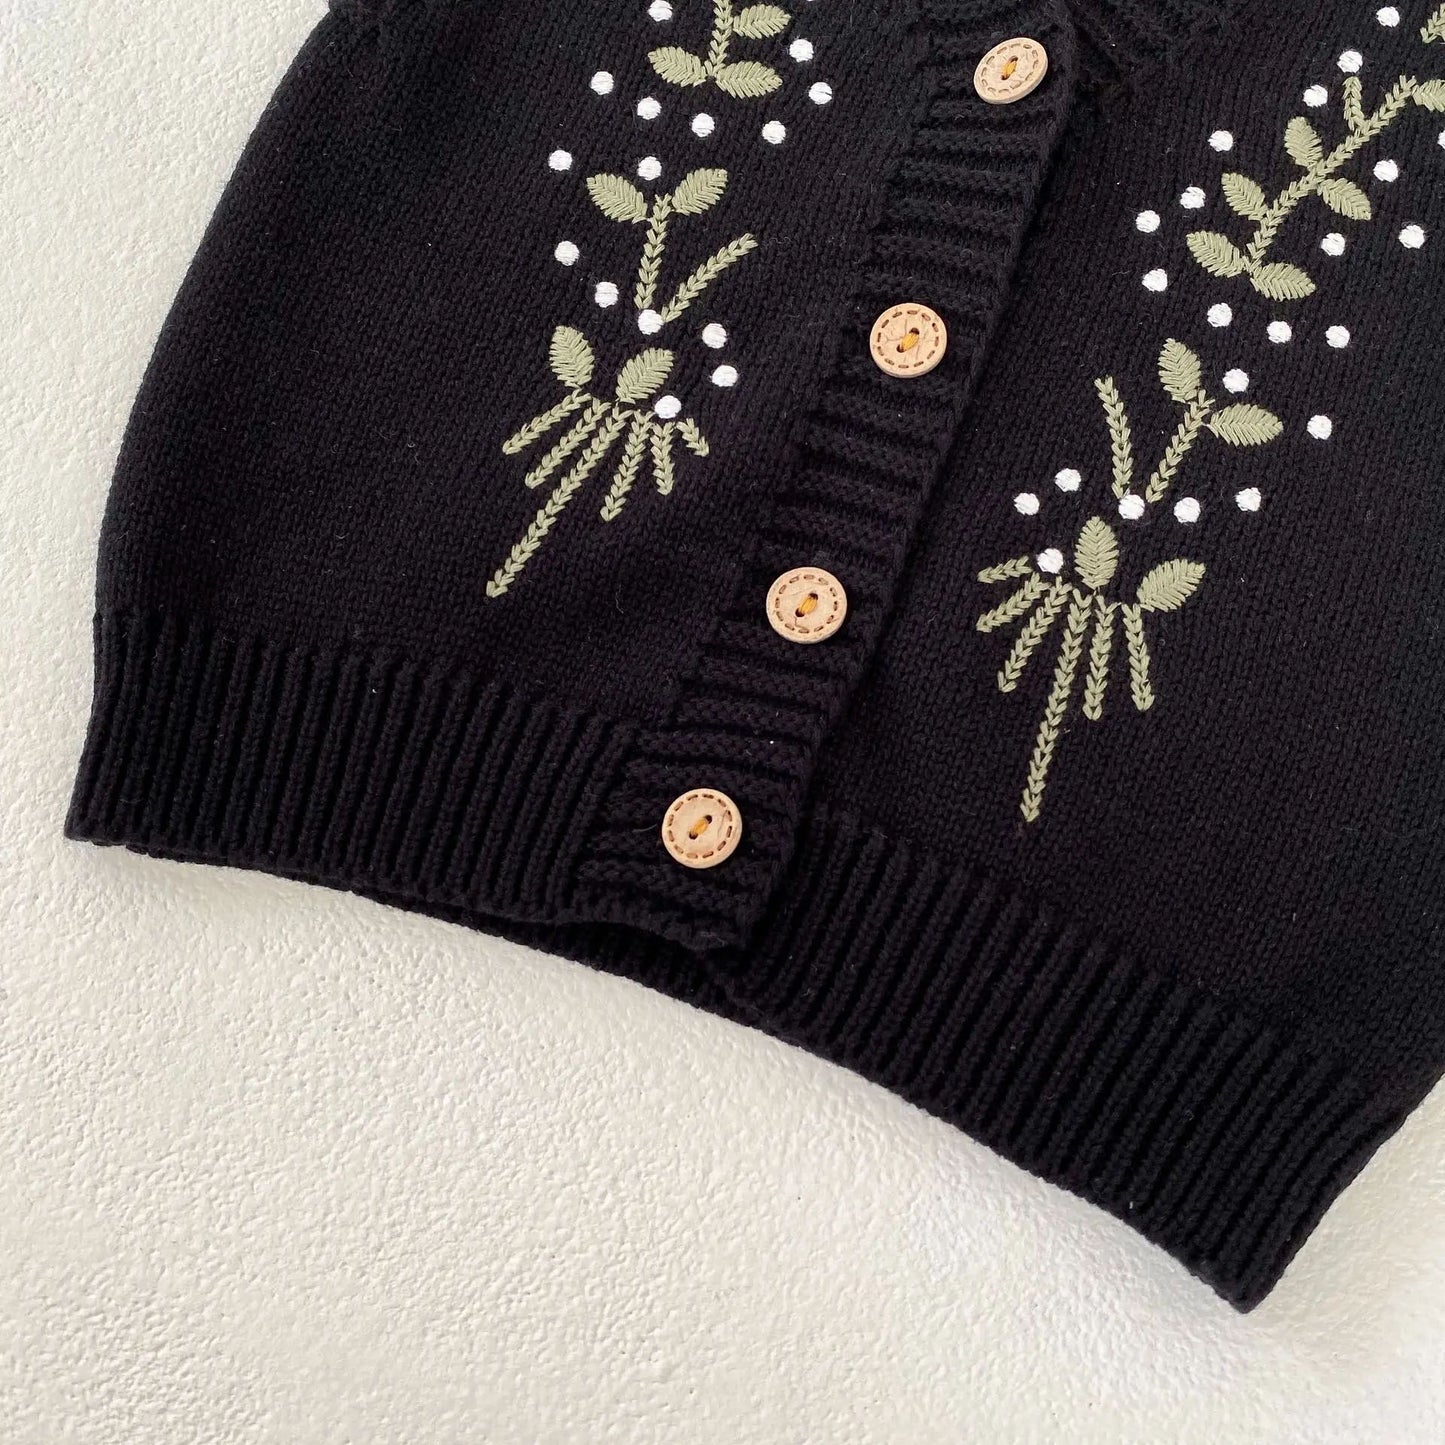 Karla embroidered sweater